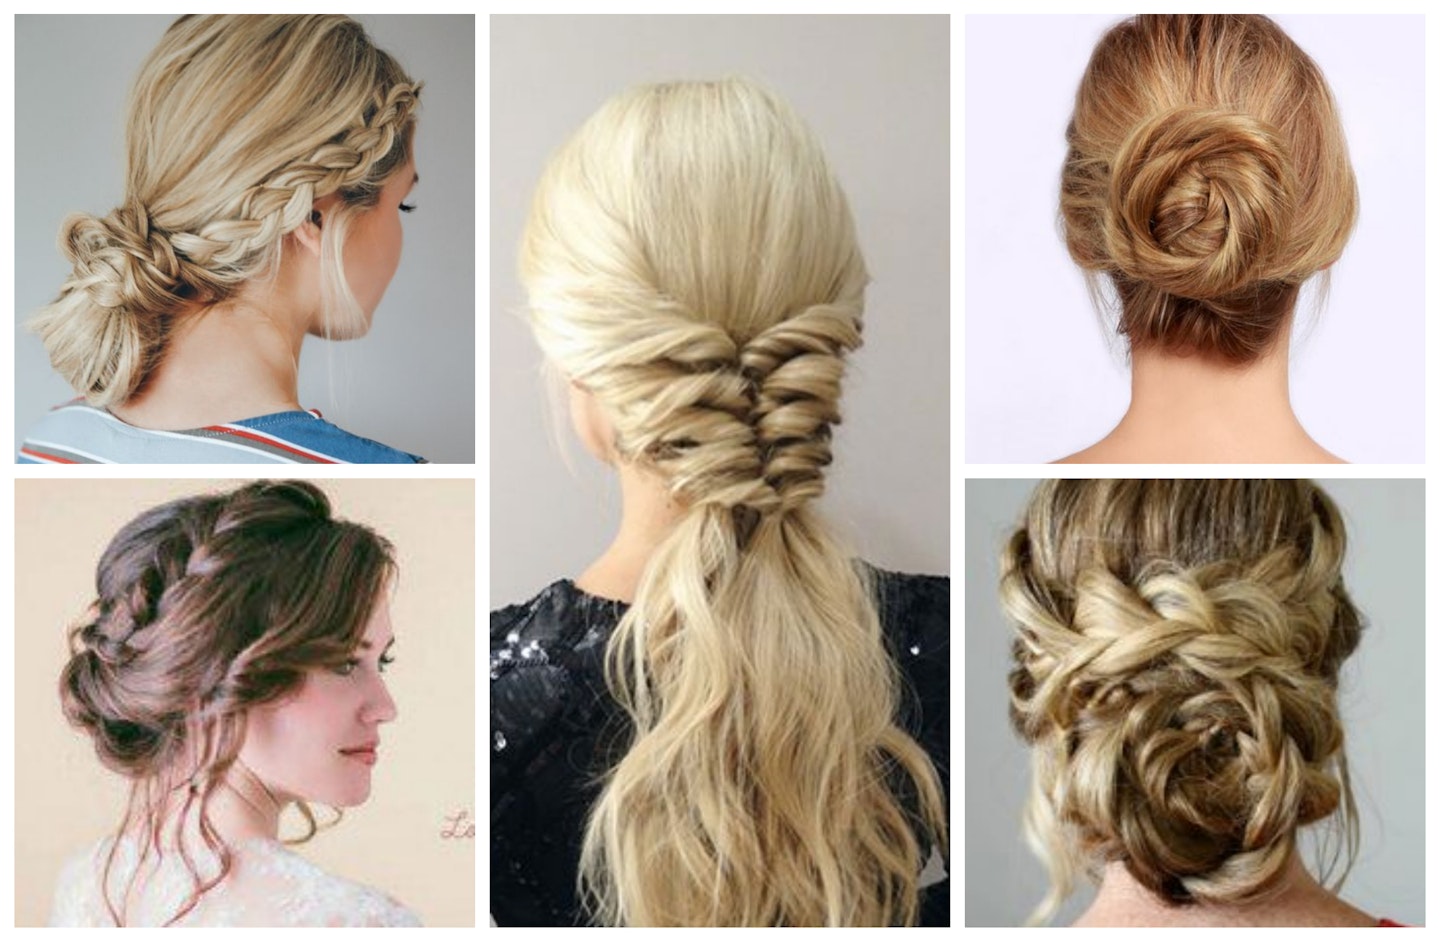 How to Braid Your Hair With Thread: 12 Steps (with Pictures)